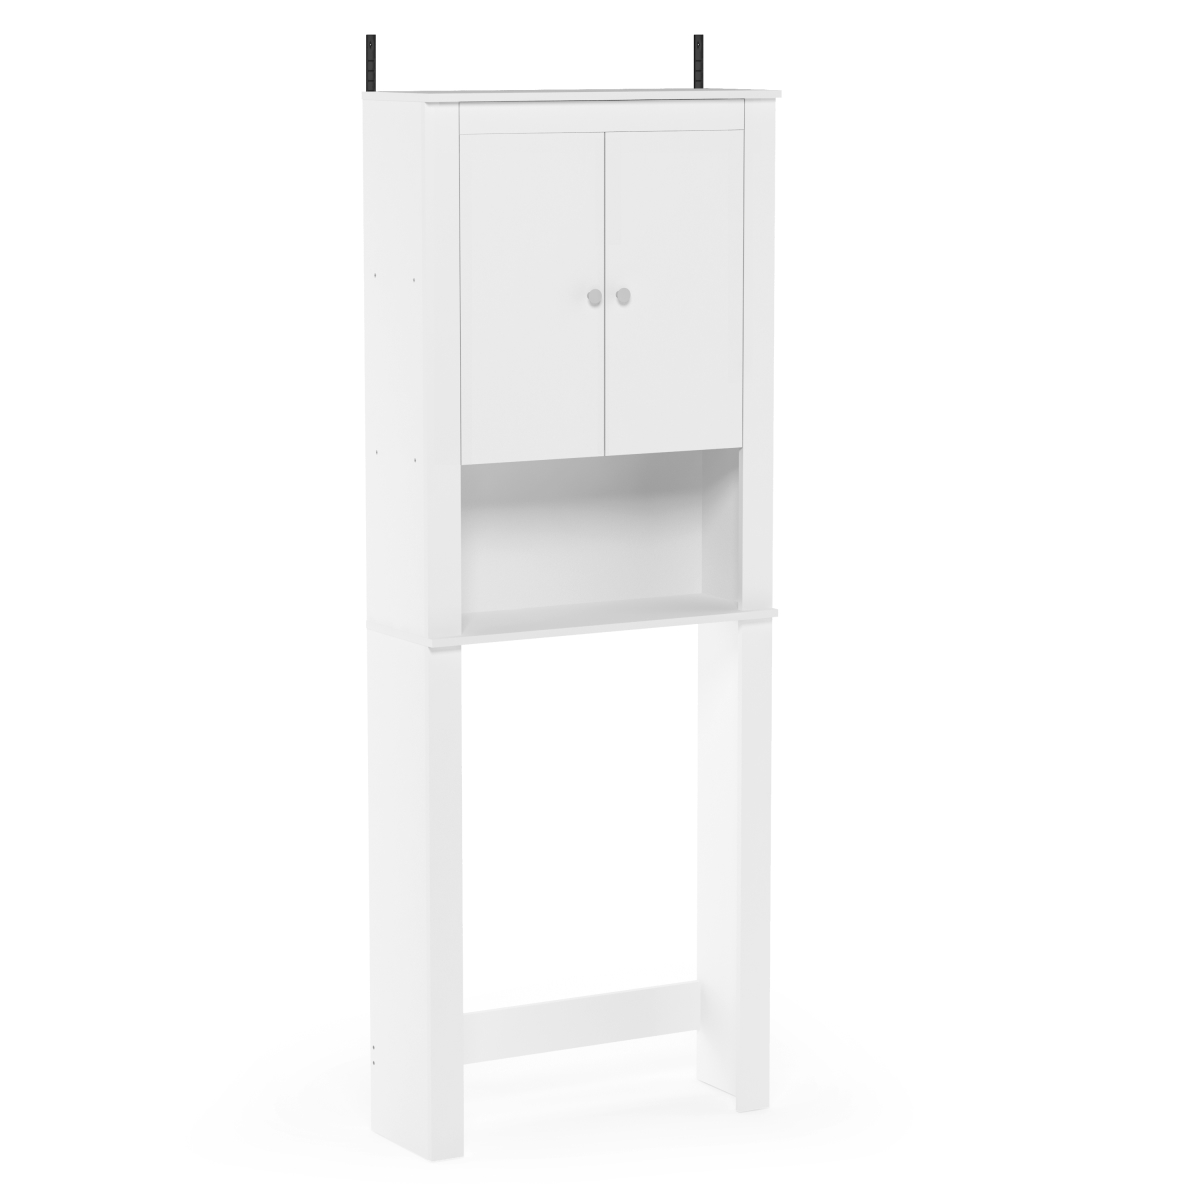 Fr18514wh Indo Double Door Bath Cabinet - White - 62.99 X 23.62 X 8.27 In.